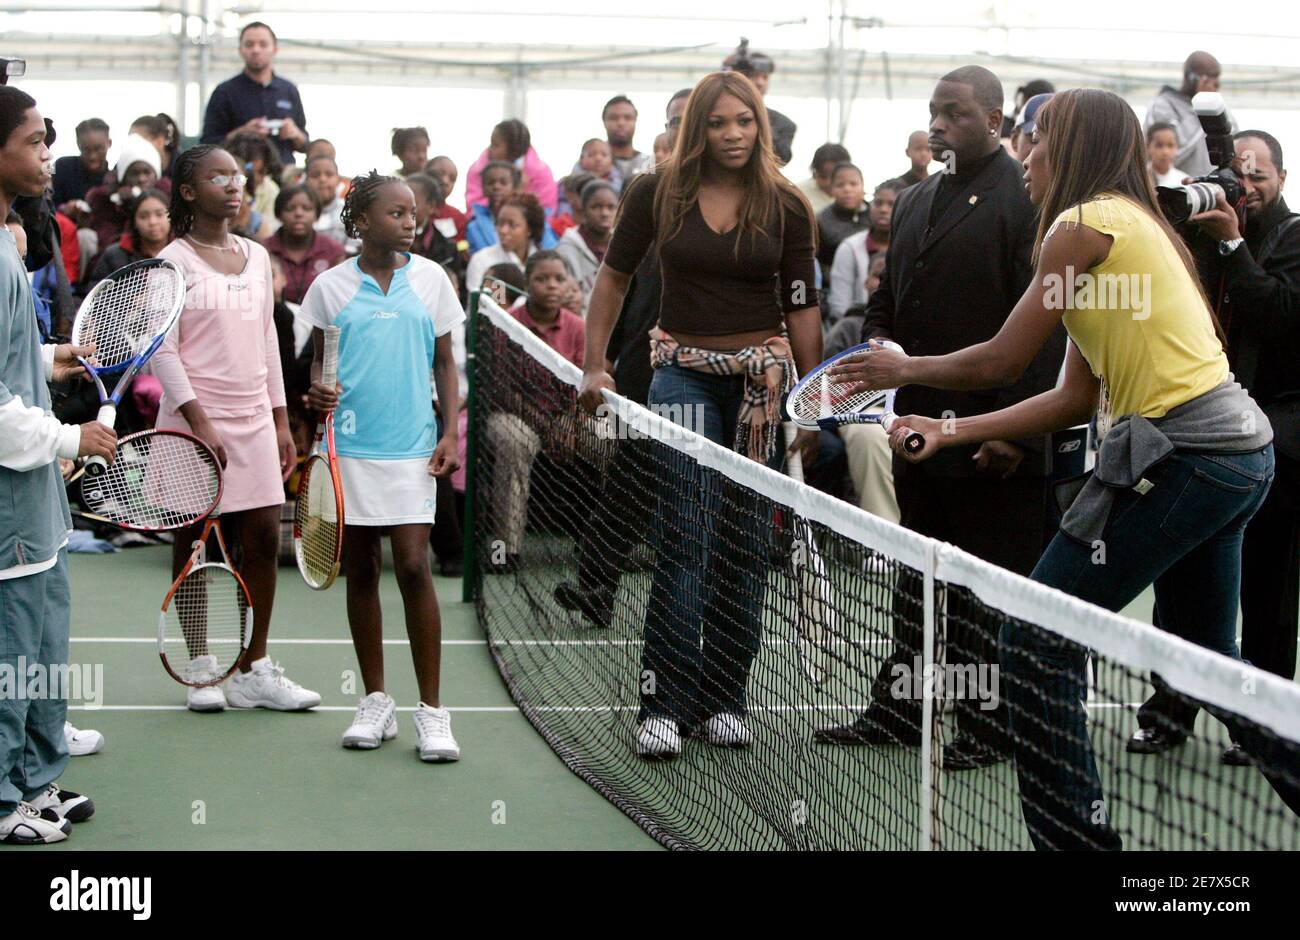 Tennis player Venus Williams (R) instructs young Washington tennis players on their technique as her sister Serena (C) looks at them during their visit to the Southeast Tennis and Learning Center in Washington December 8, 2005. The Williams sisters met with dozens of children of Washington's southeast as part of their 'Williams Sisters Tour' to help raise money for charities. REUTERS/Jason Reed Stock Photo